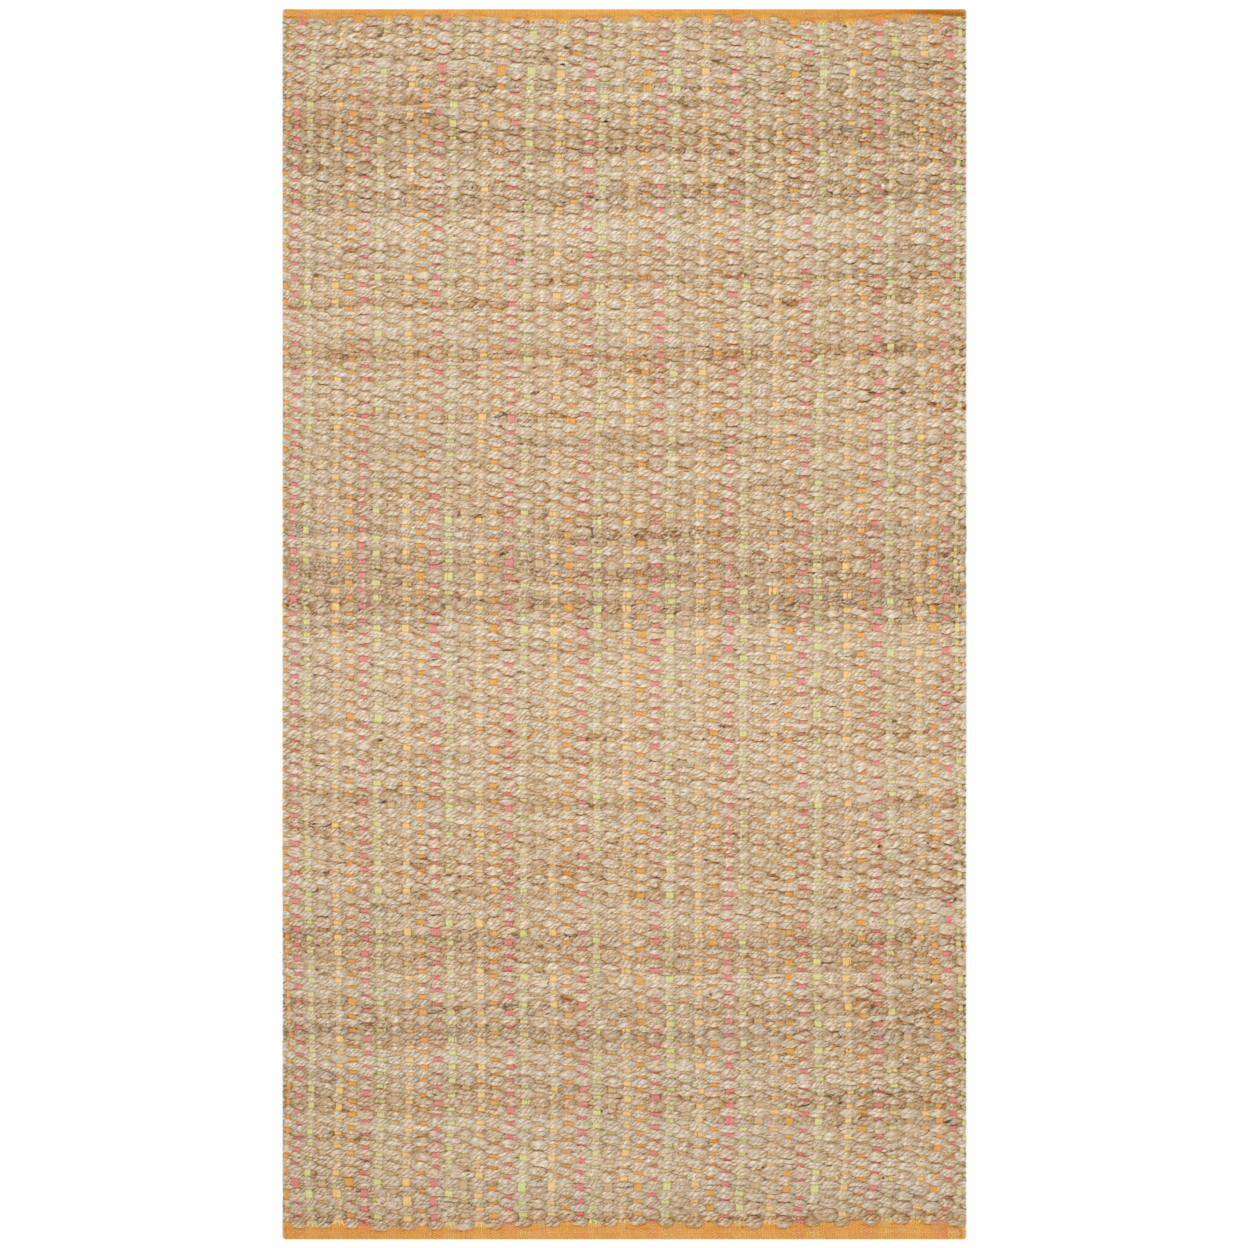 SAFAVIEH Cape Cod Collection CAP811D Handwoven Spring Rug - 3' X 5'